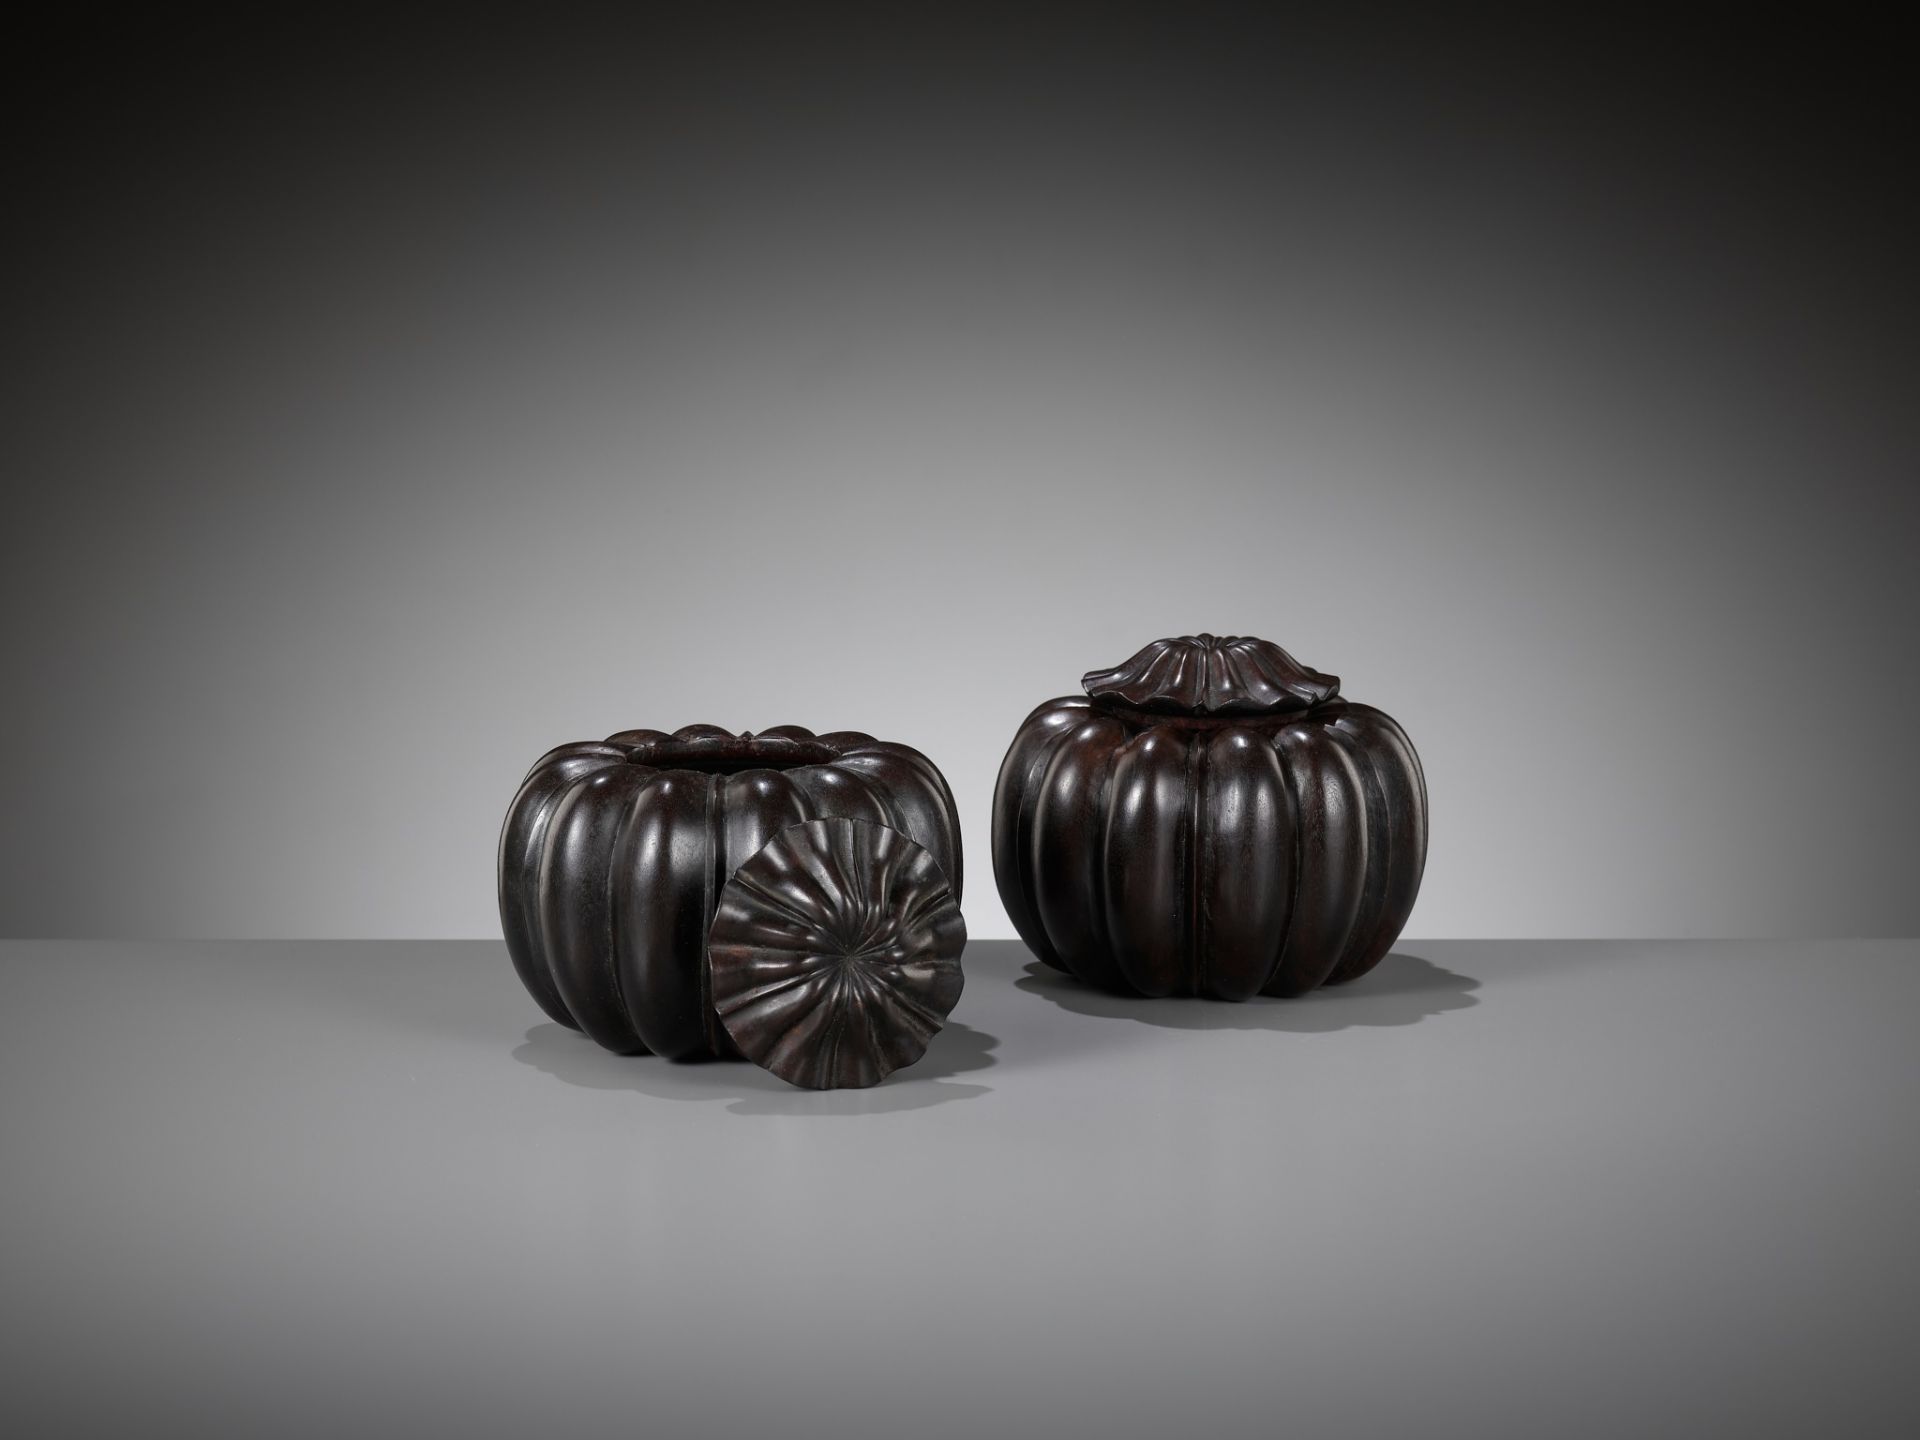 A PAIR OF ZITAN WEIQI COUNTER CONTAINERS, WEIQIZIHE, 17TH-18TH CENTURY - Image 5 of 10